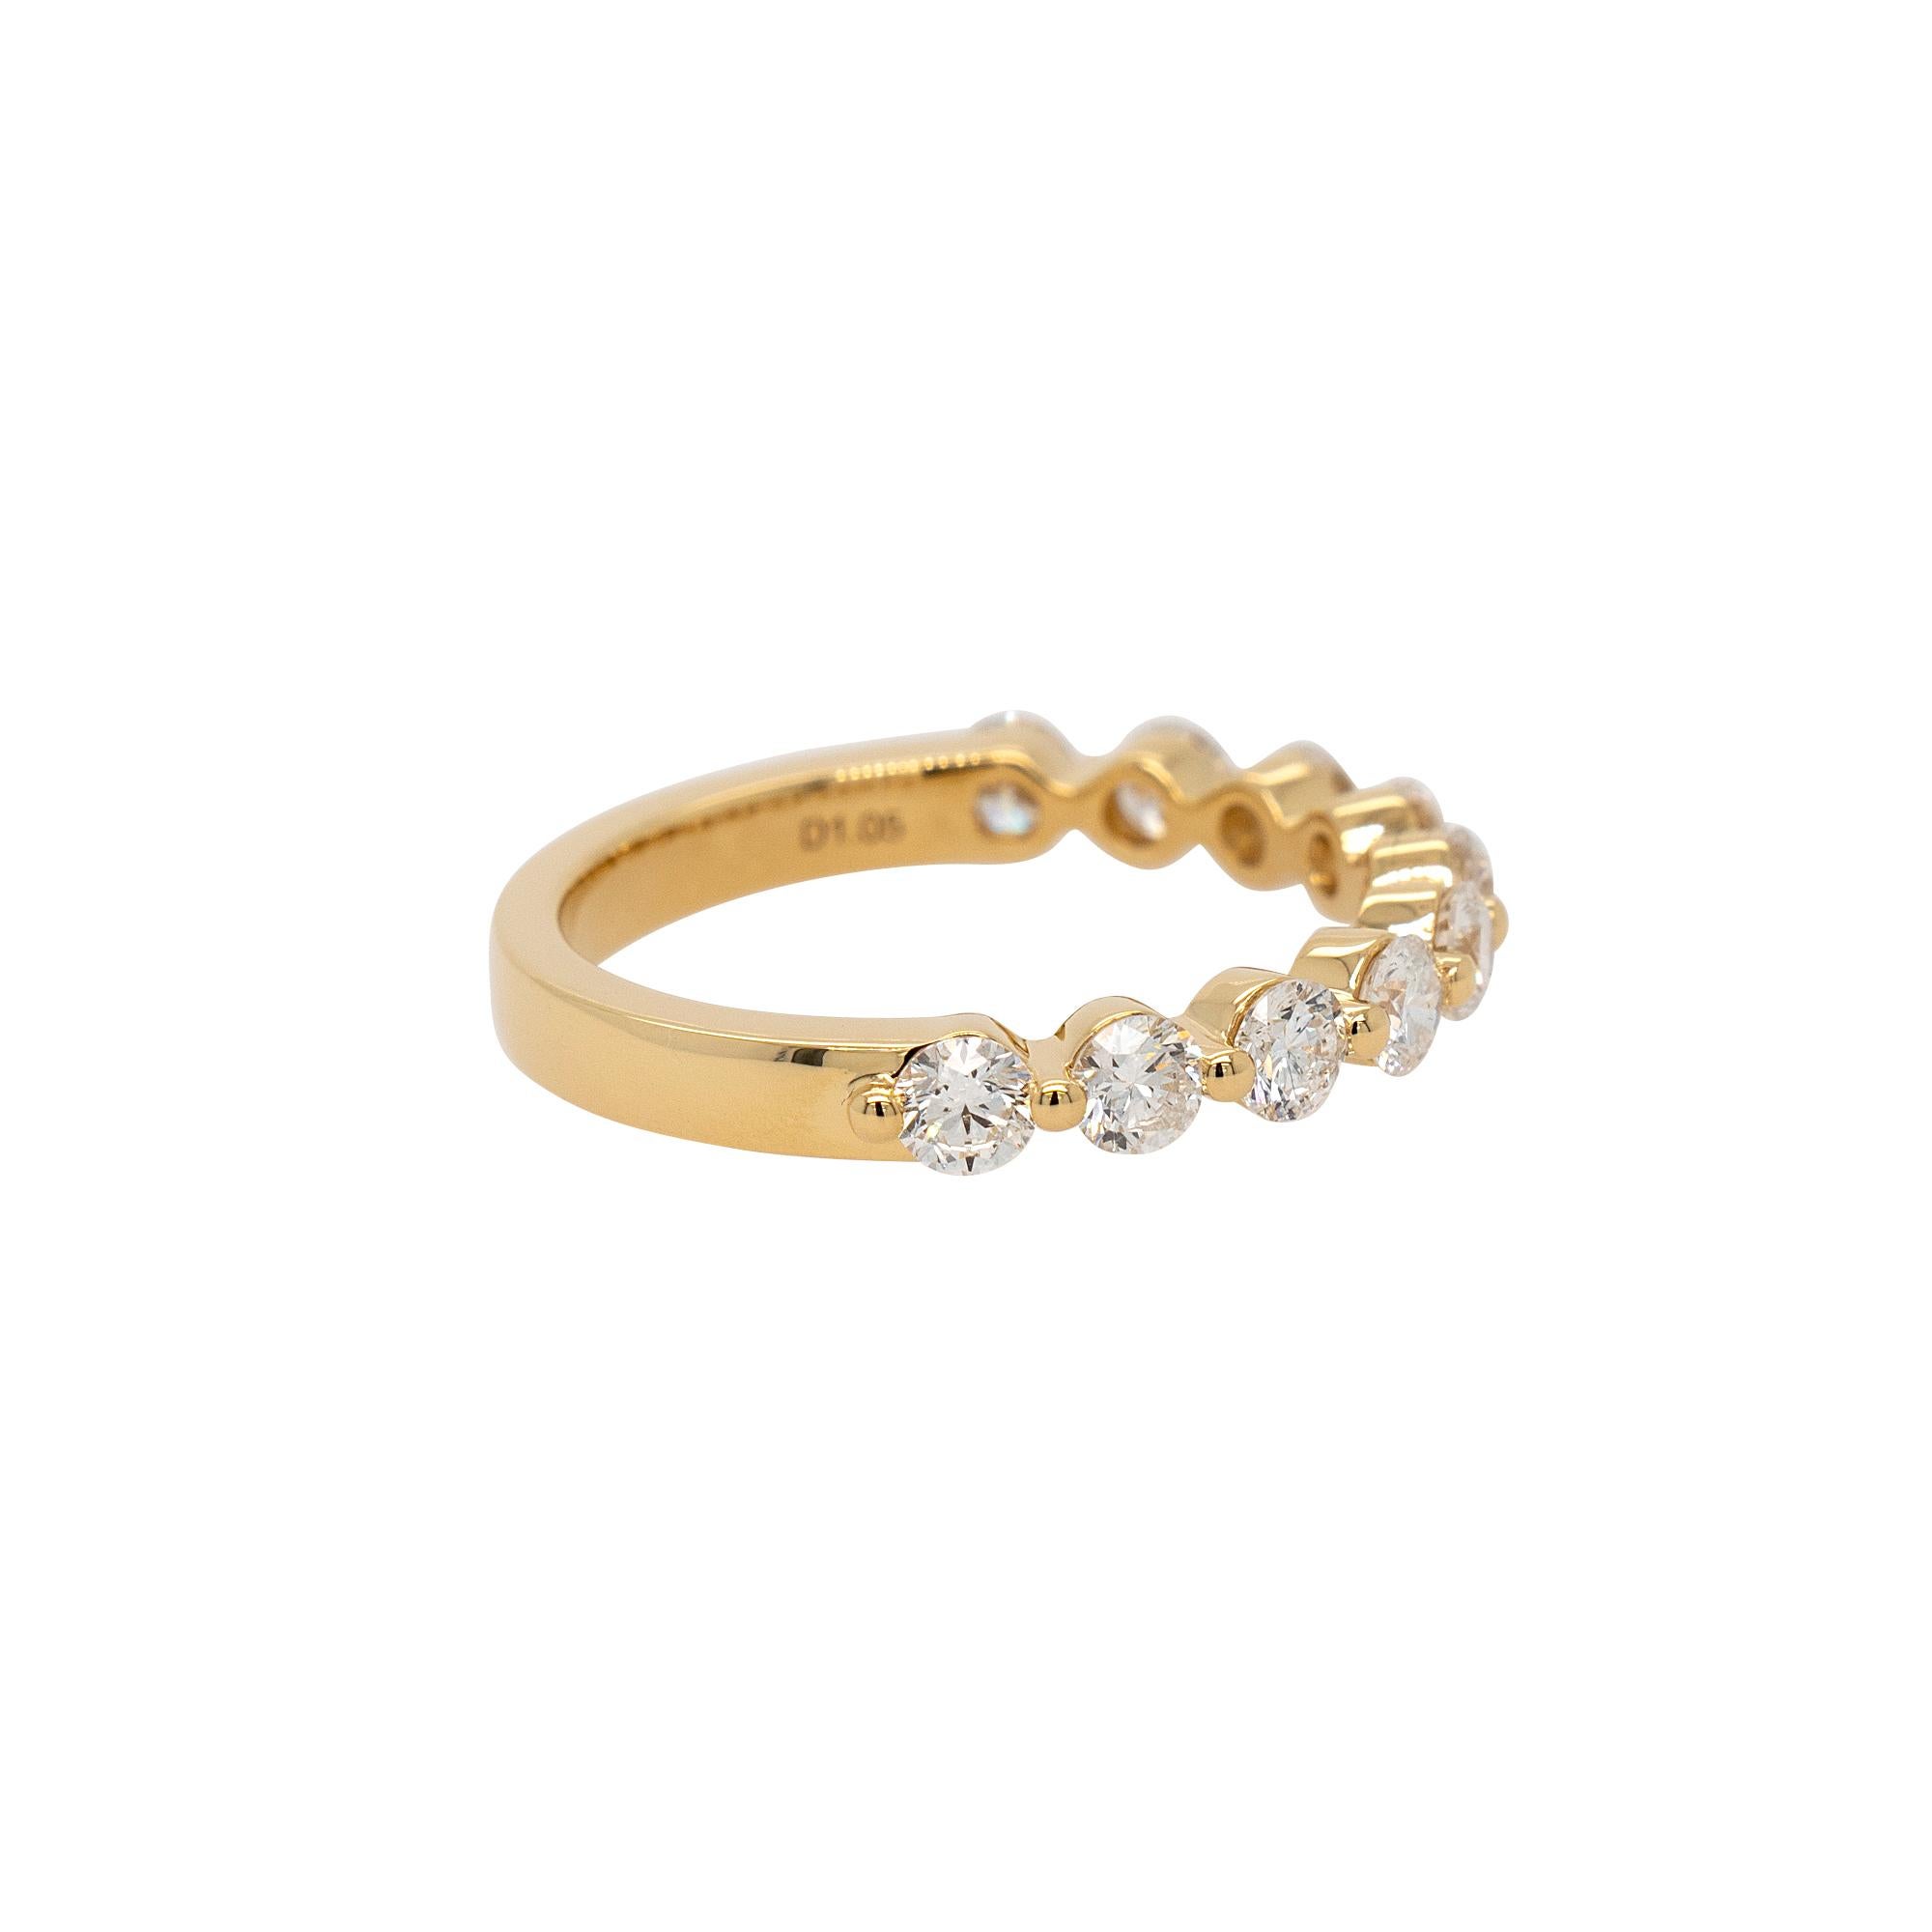 Diamond Details:
1.05ct Round Brilliant Natural Diamond
G Color VS Clarity
Ring Material: 18k Yellow Gold
Ring Size: 6.25 (can be sized)
Total Weight: 3.4g (2.2dwt)
This item comes with a presentation box!
SKU: A30317338

With its exquisite sparkle